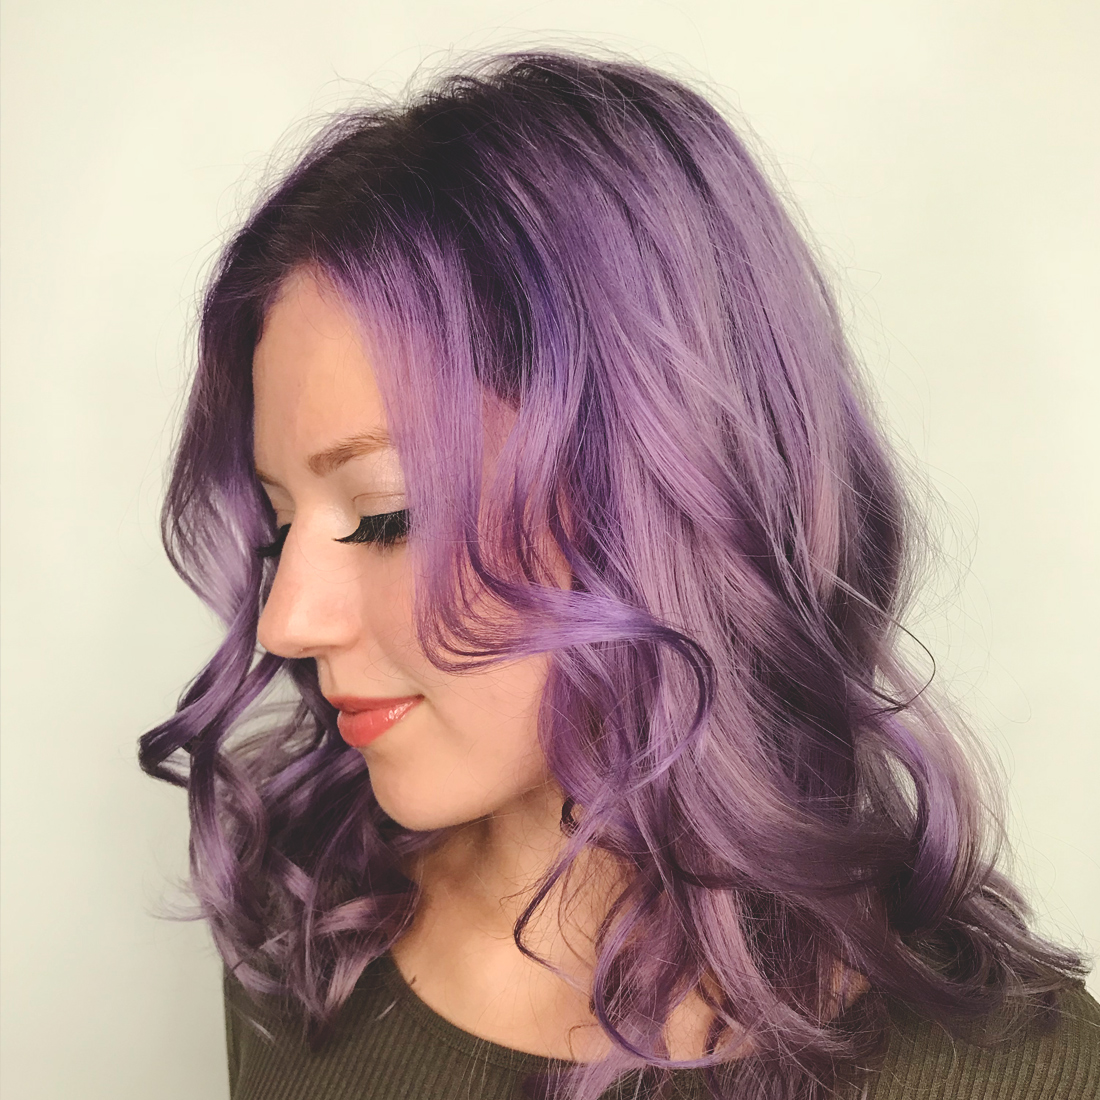 Female customer with purple colour hairstyle